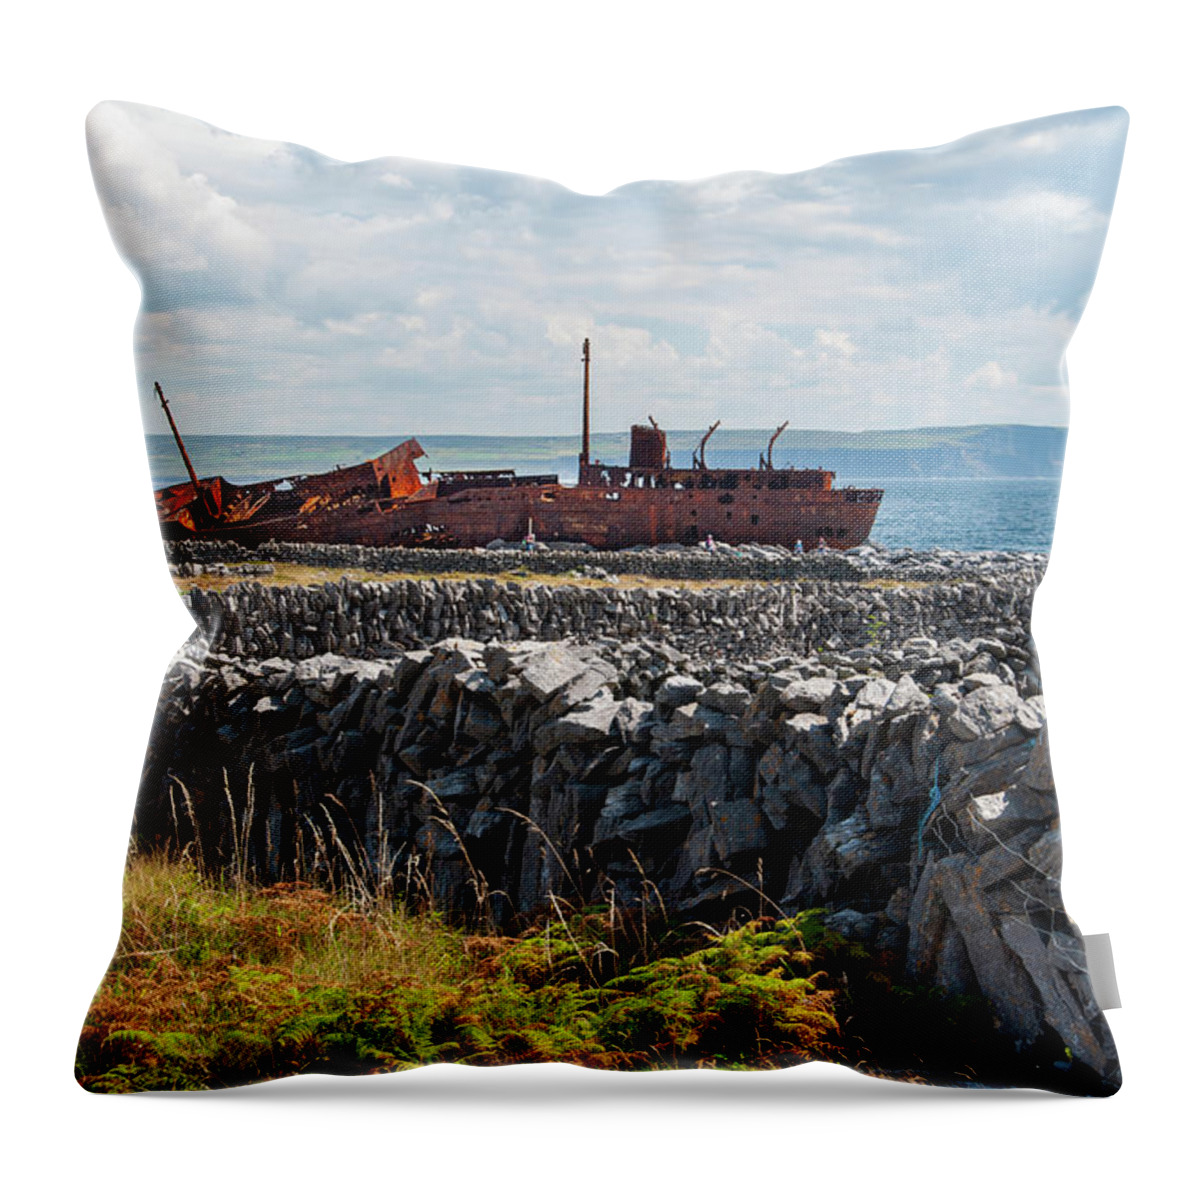 Shipwreck Throw Pillow featuring the photograph Shipwreck on Inisheer by Rob Hemphill